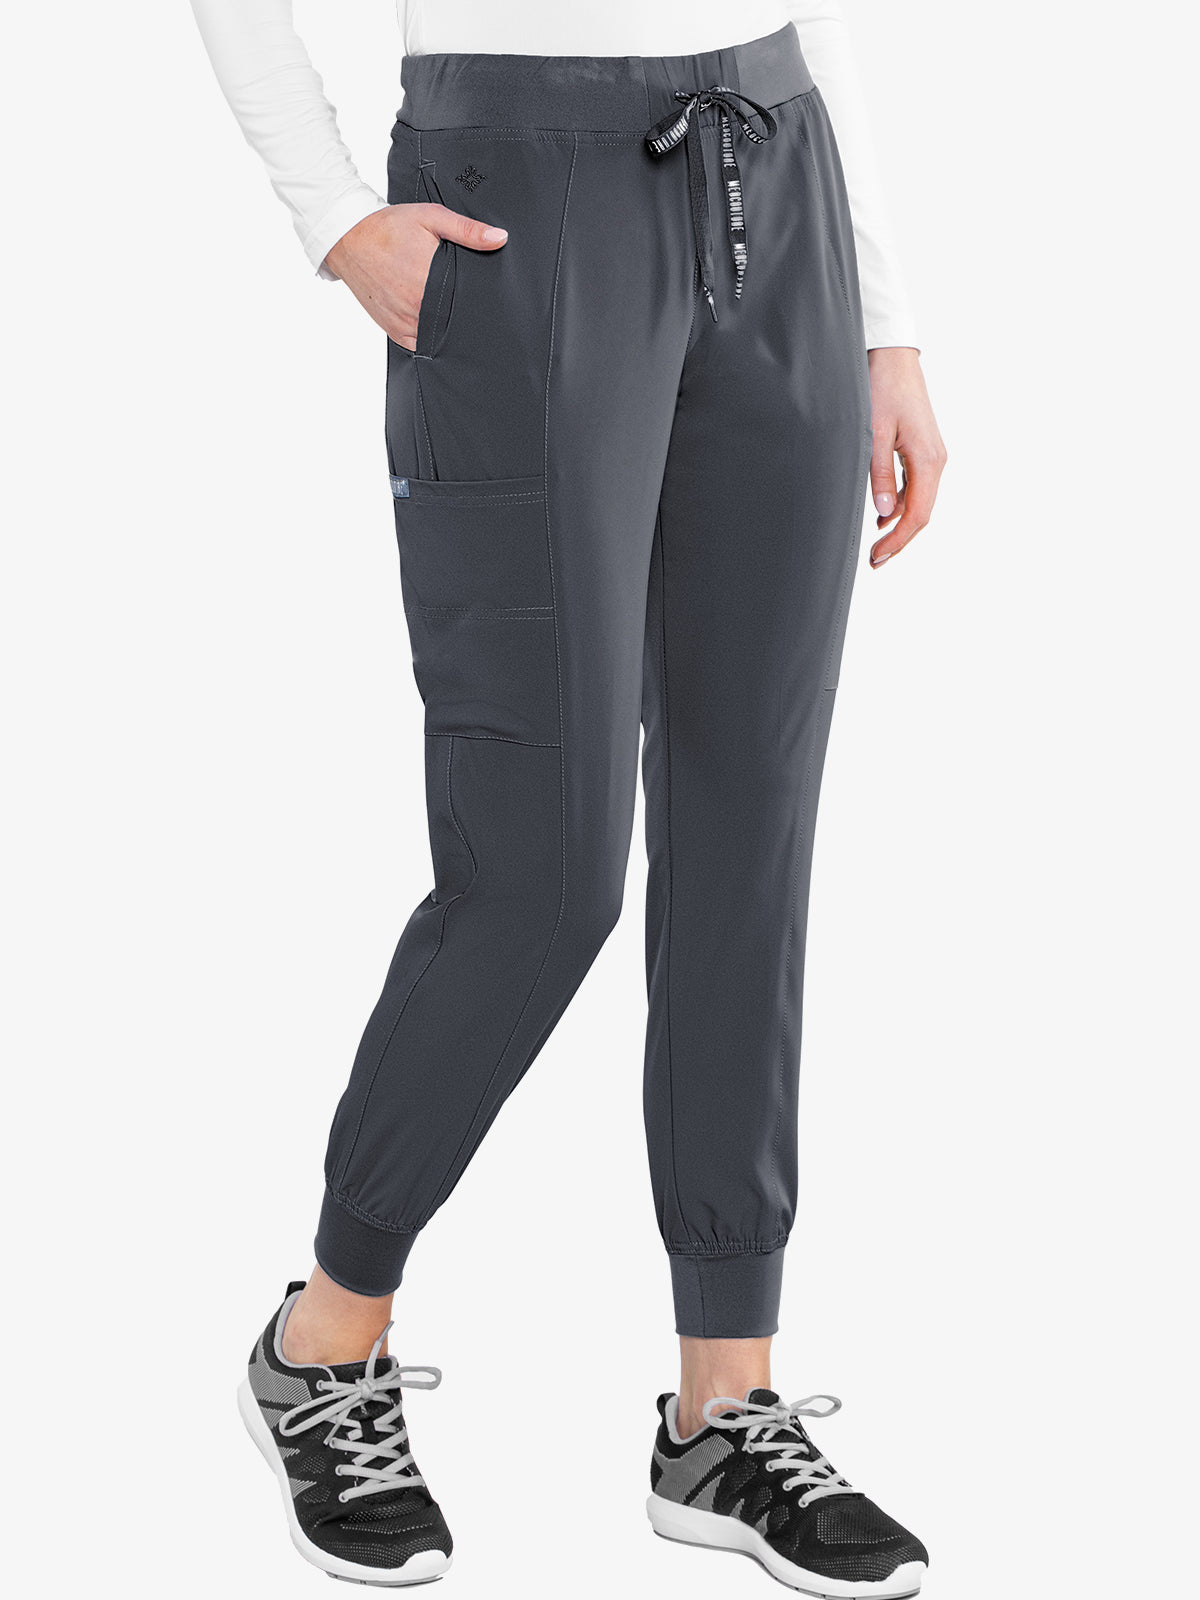 Med Couture Peaches 8721 Seamed Jogger Scrub Pant - TALL – Valley West  Uniforms